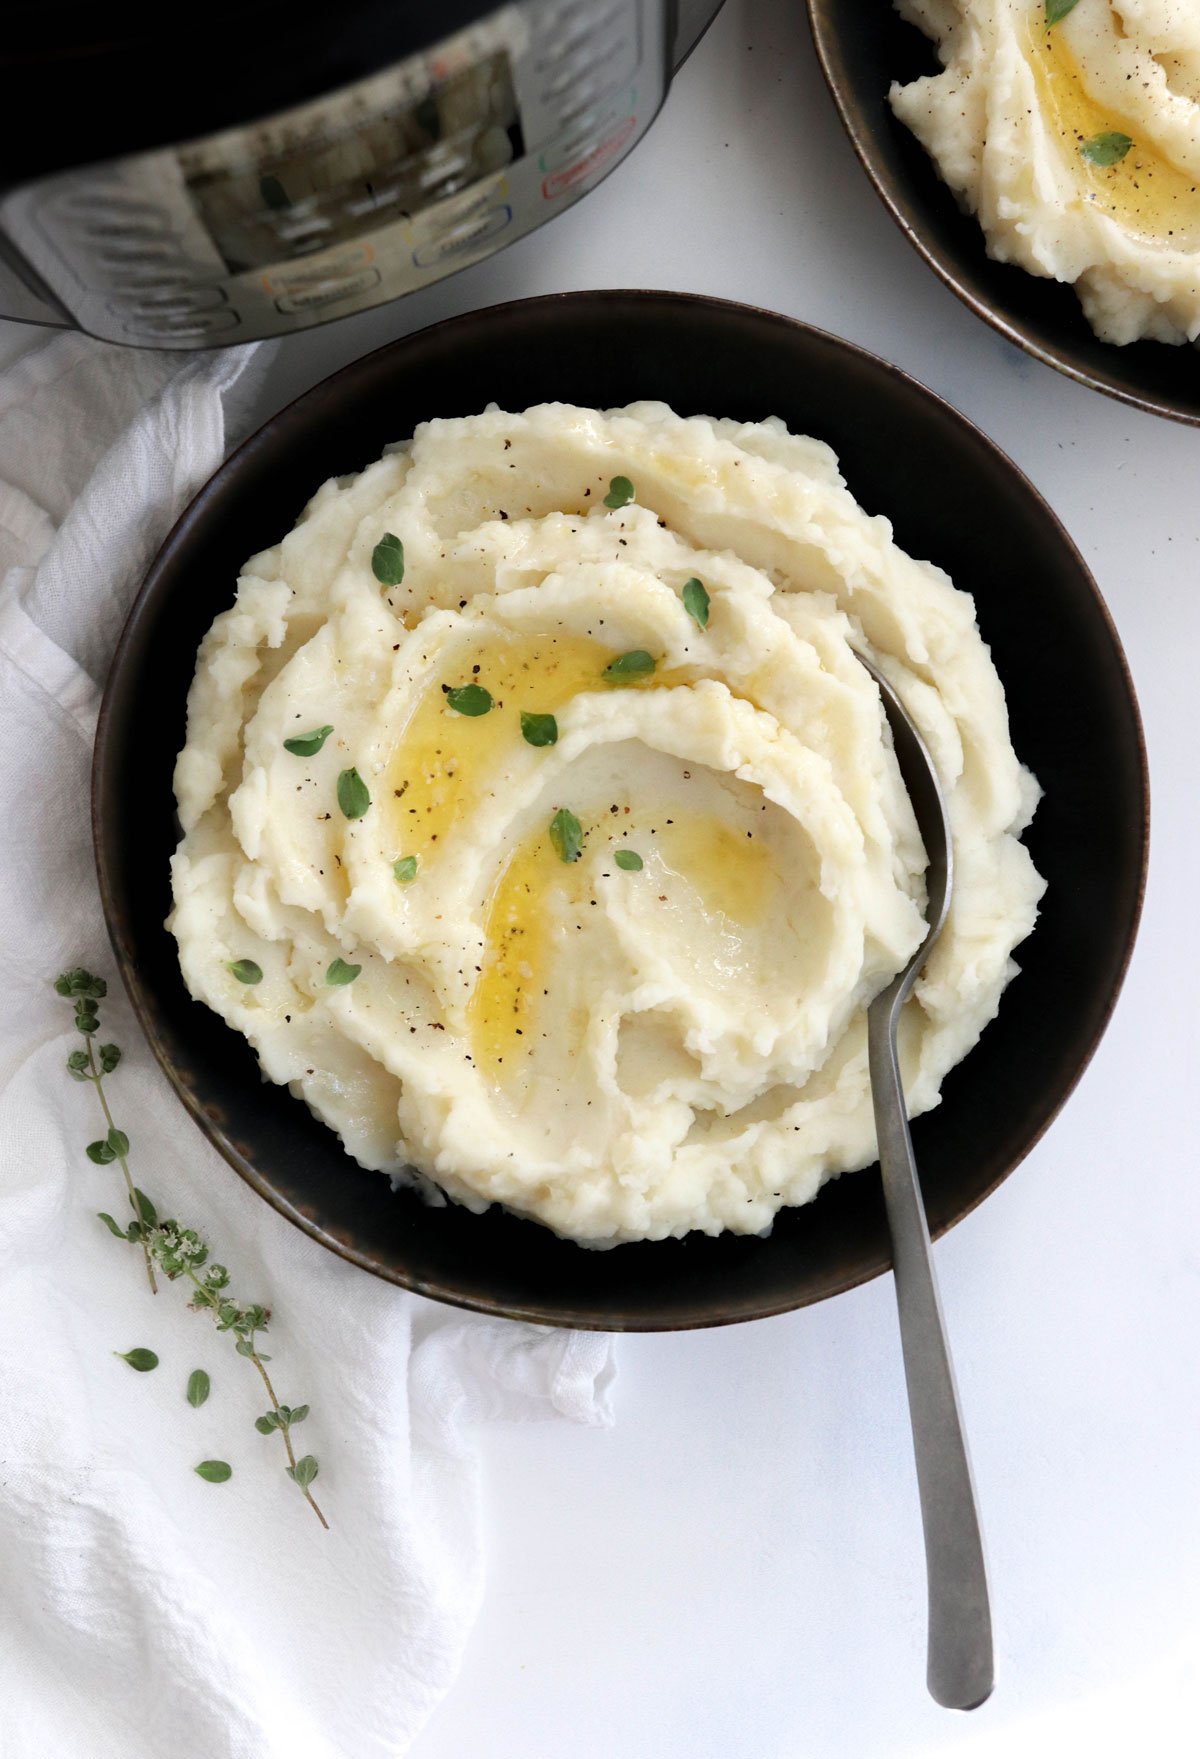 Mashed potatoes in black bowl with spoon